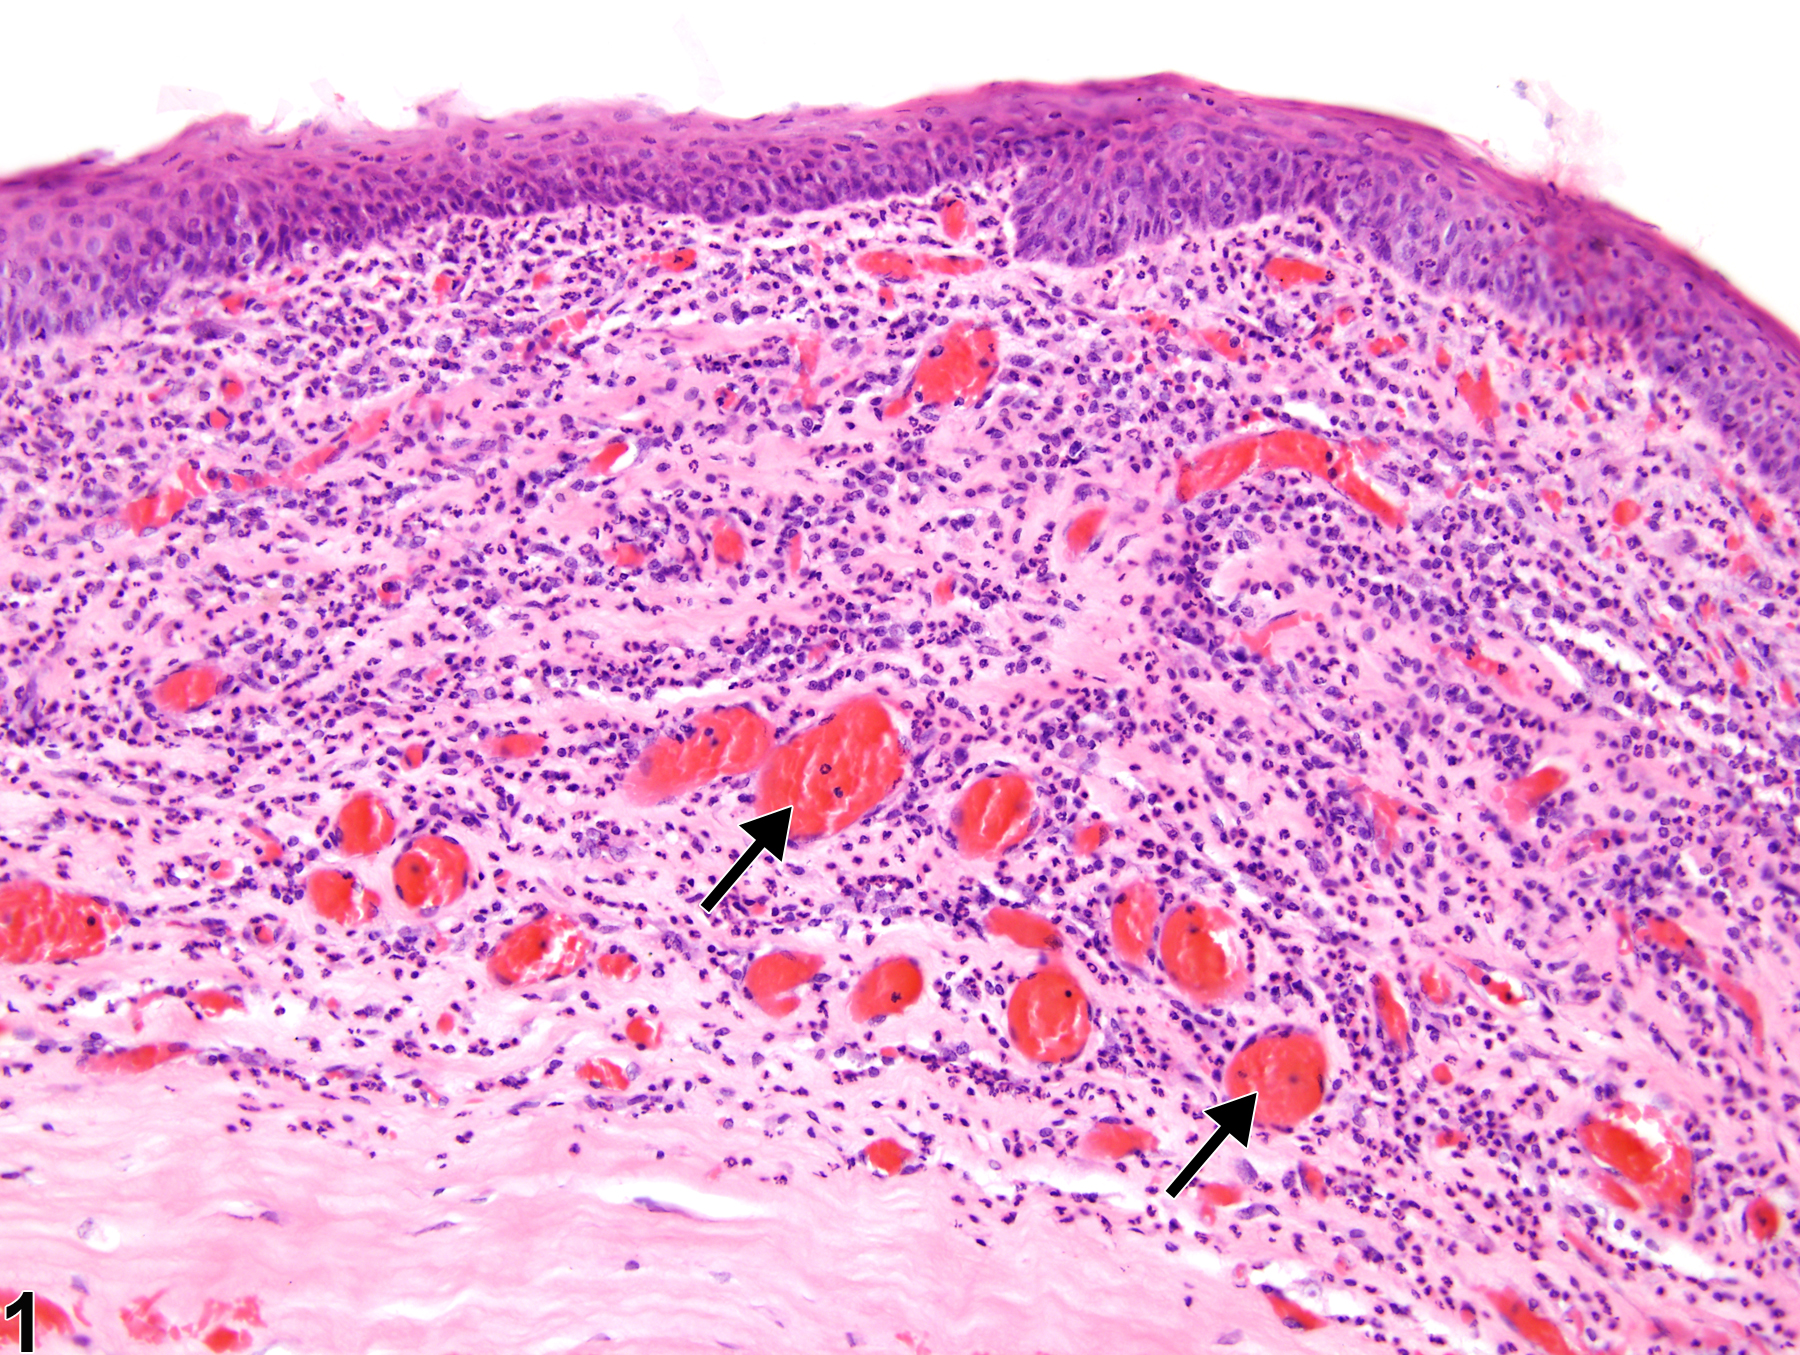 Image of inflammation in the eye from a male F344/N rat in a chronic study